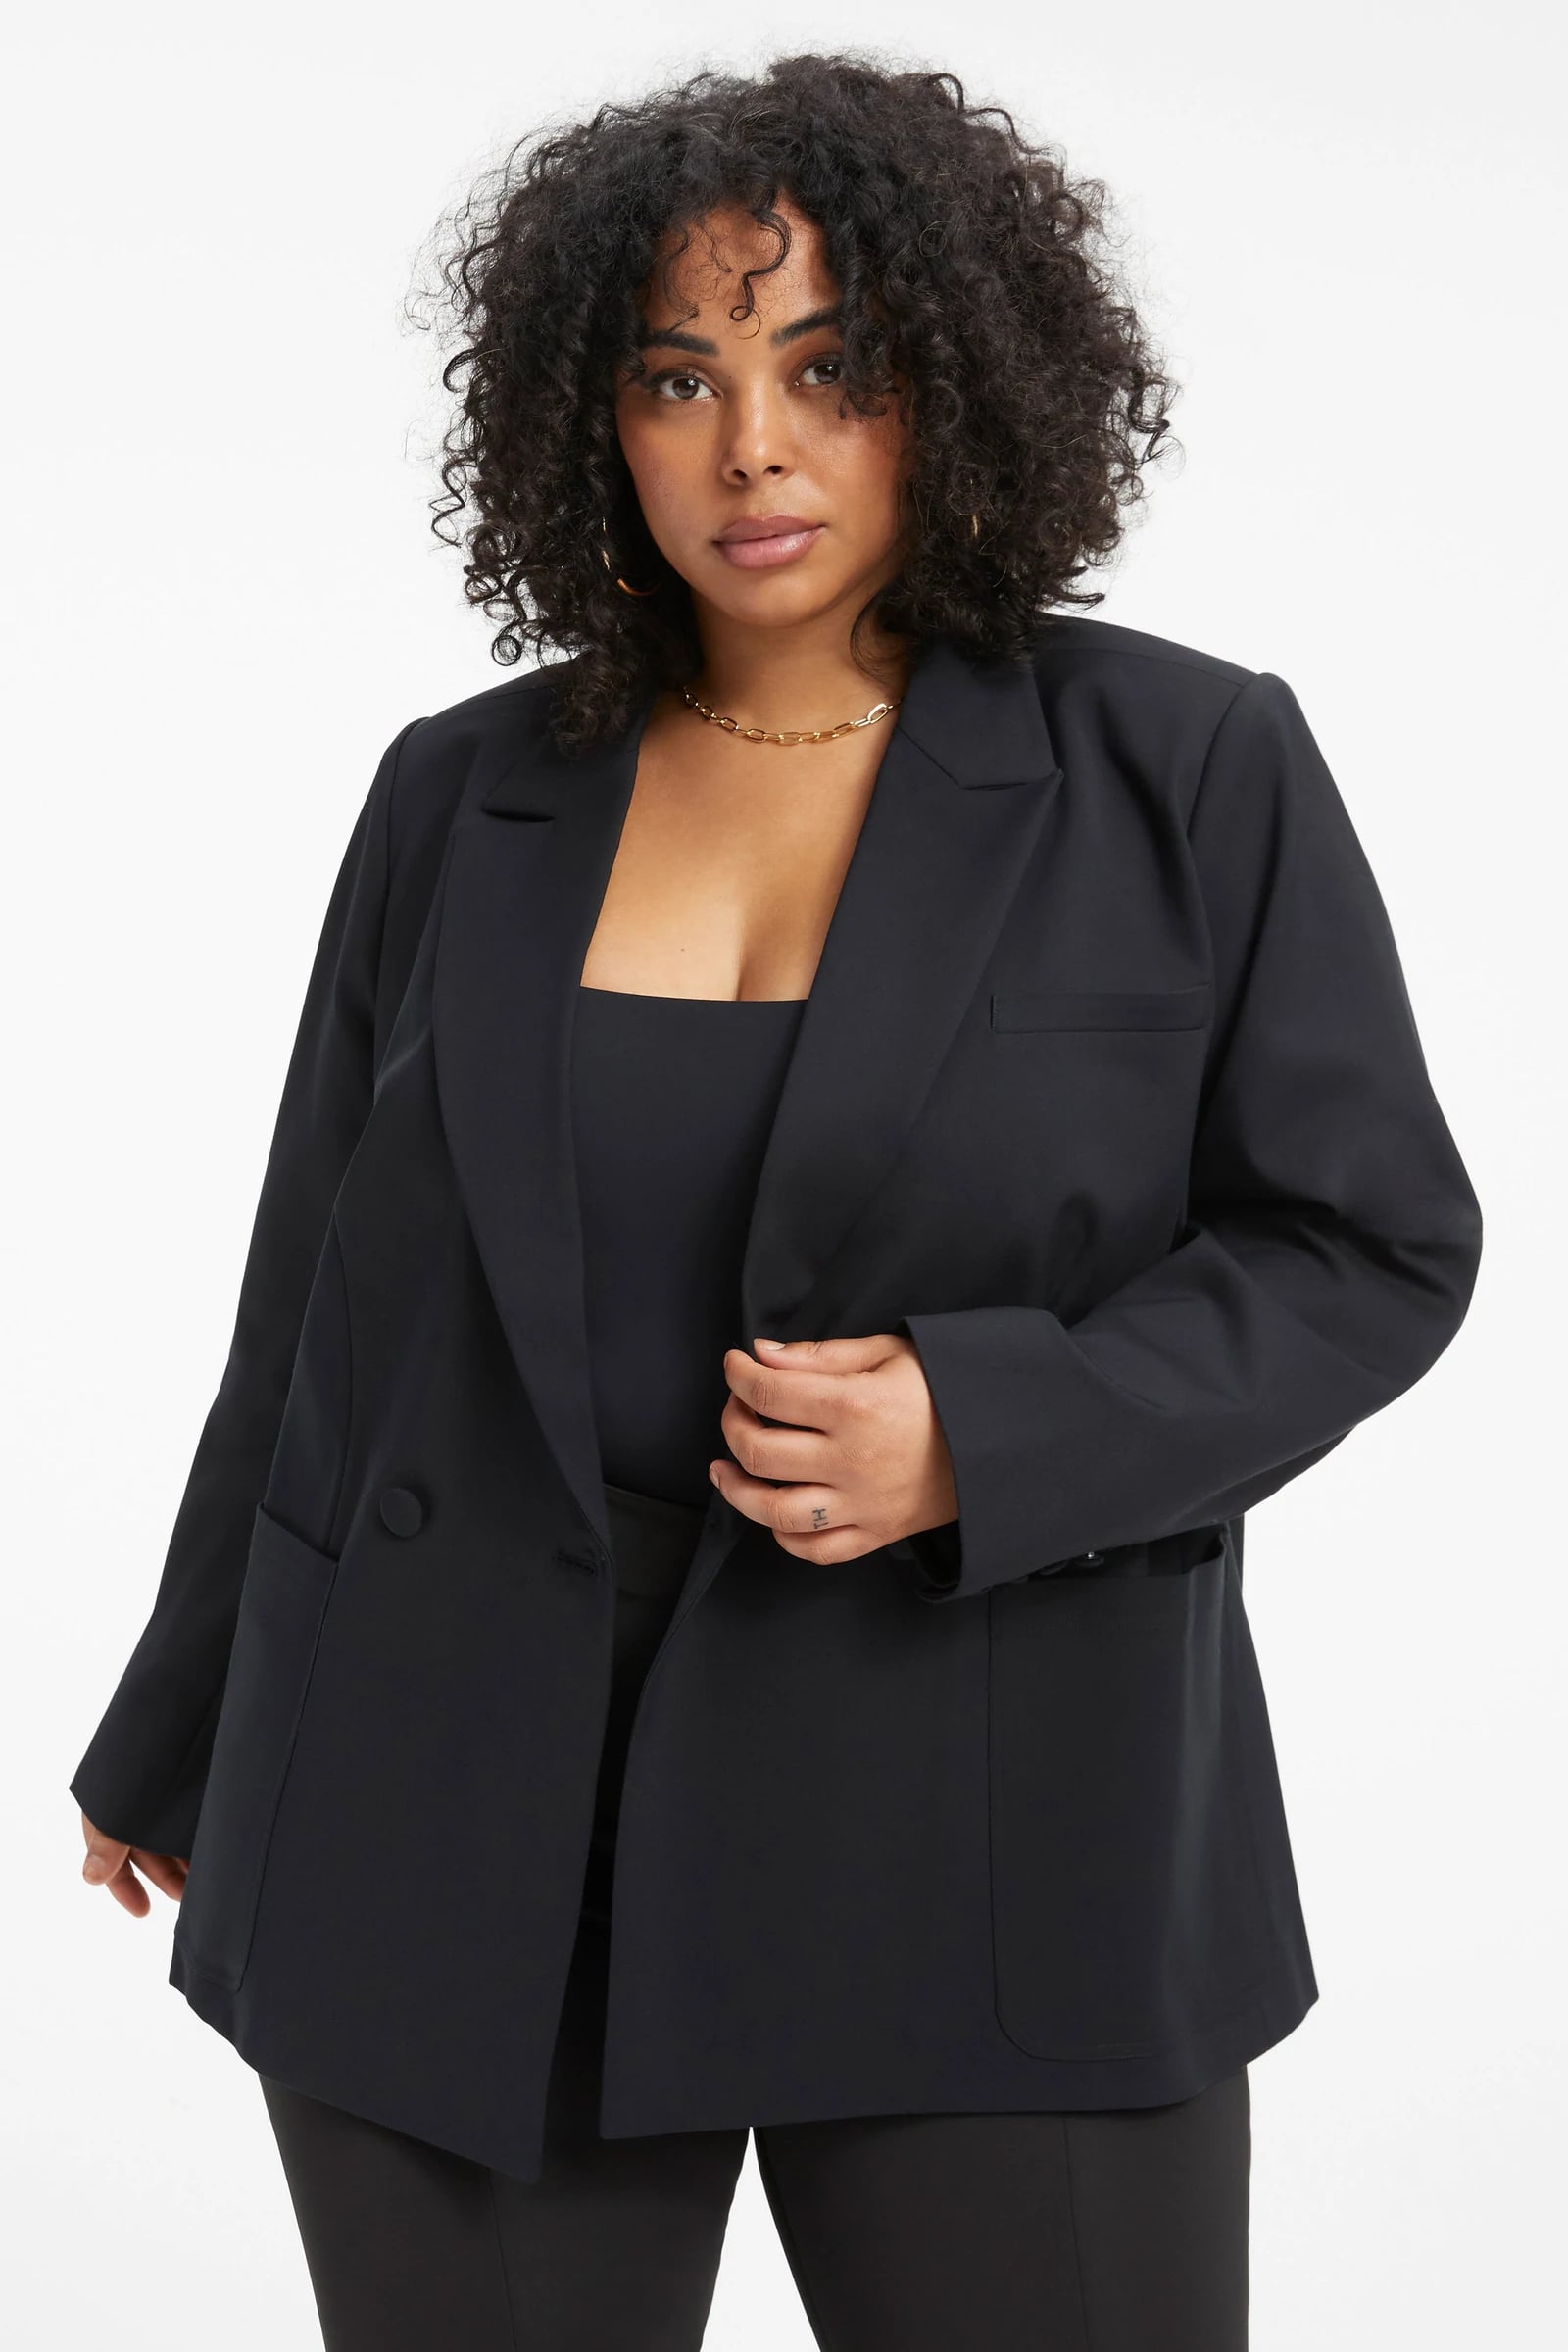 280 Plus Size Business Suits & Work Outfits ideas